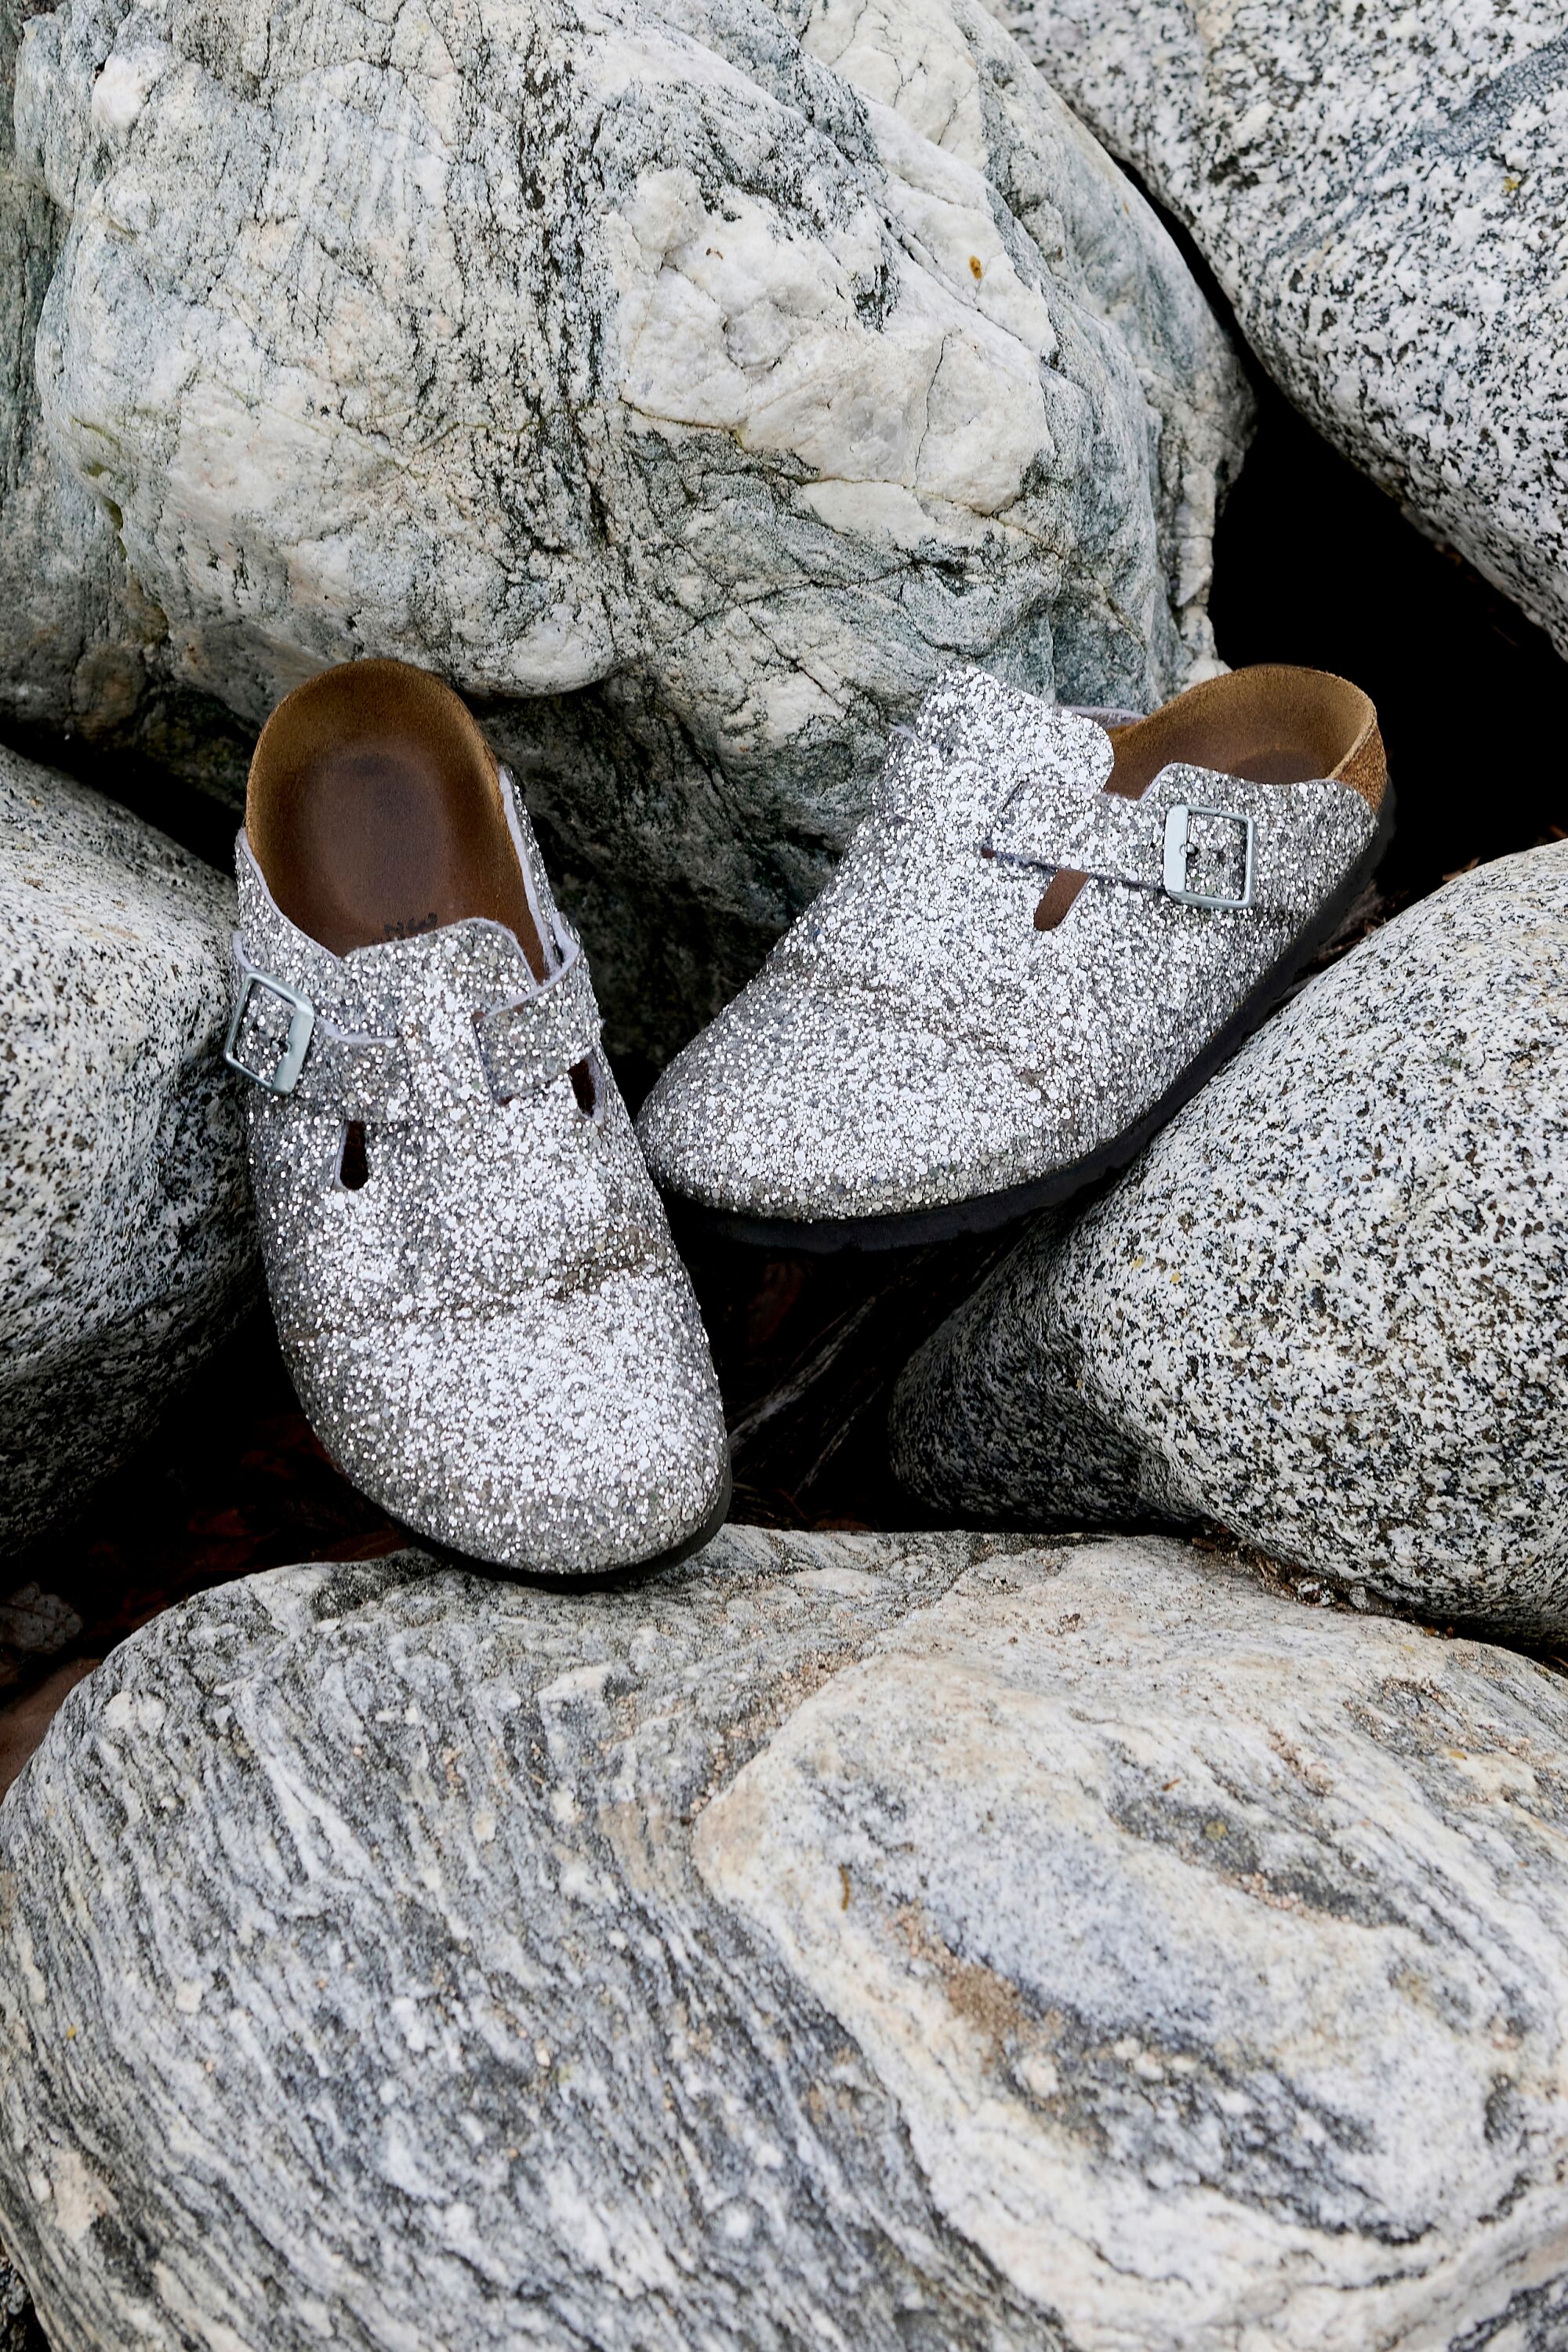 A pair of Boston sandals on rocks.